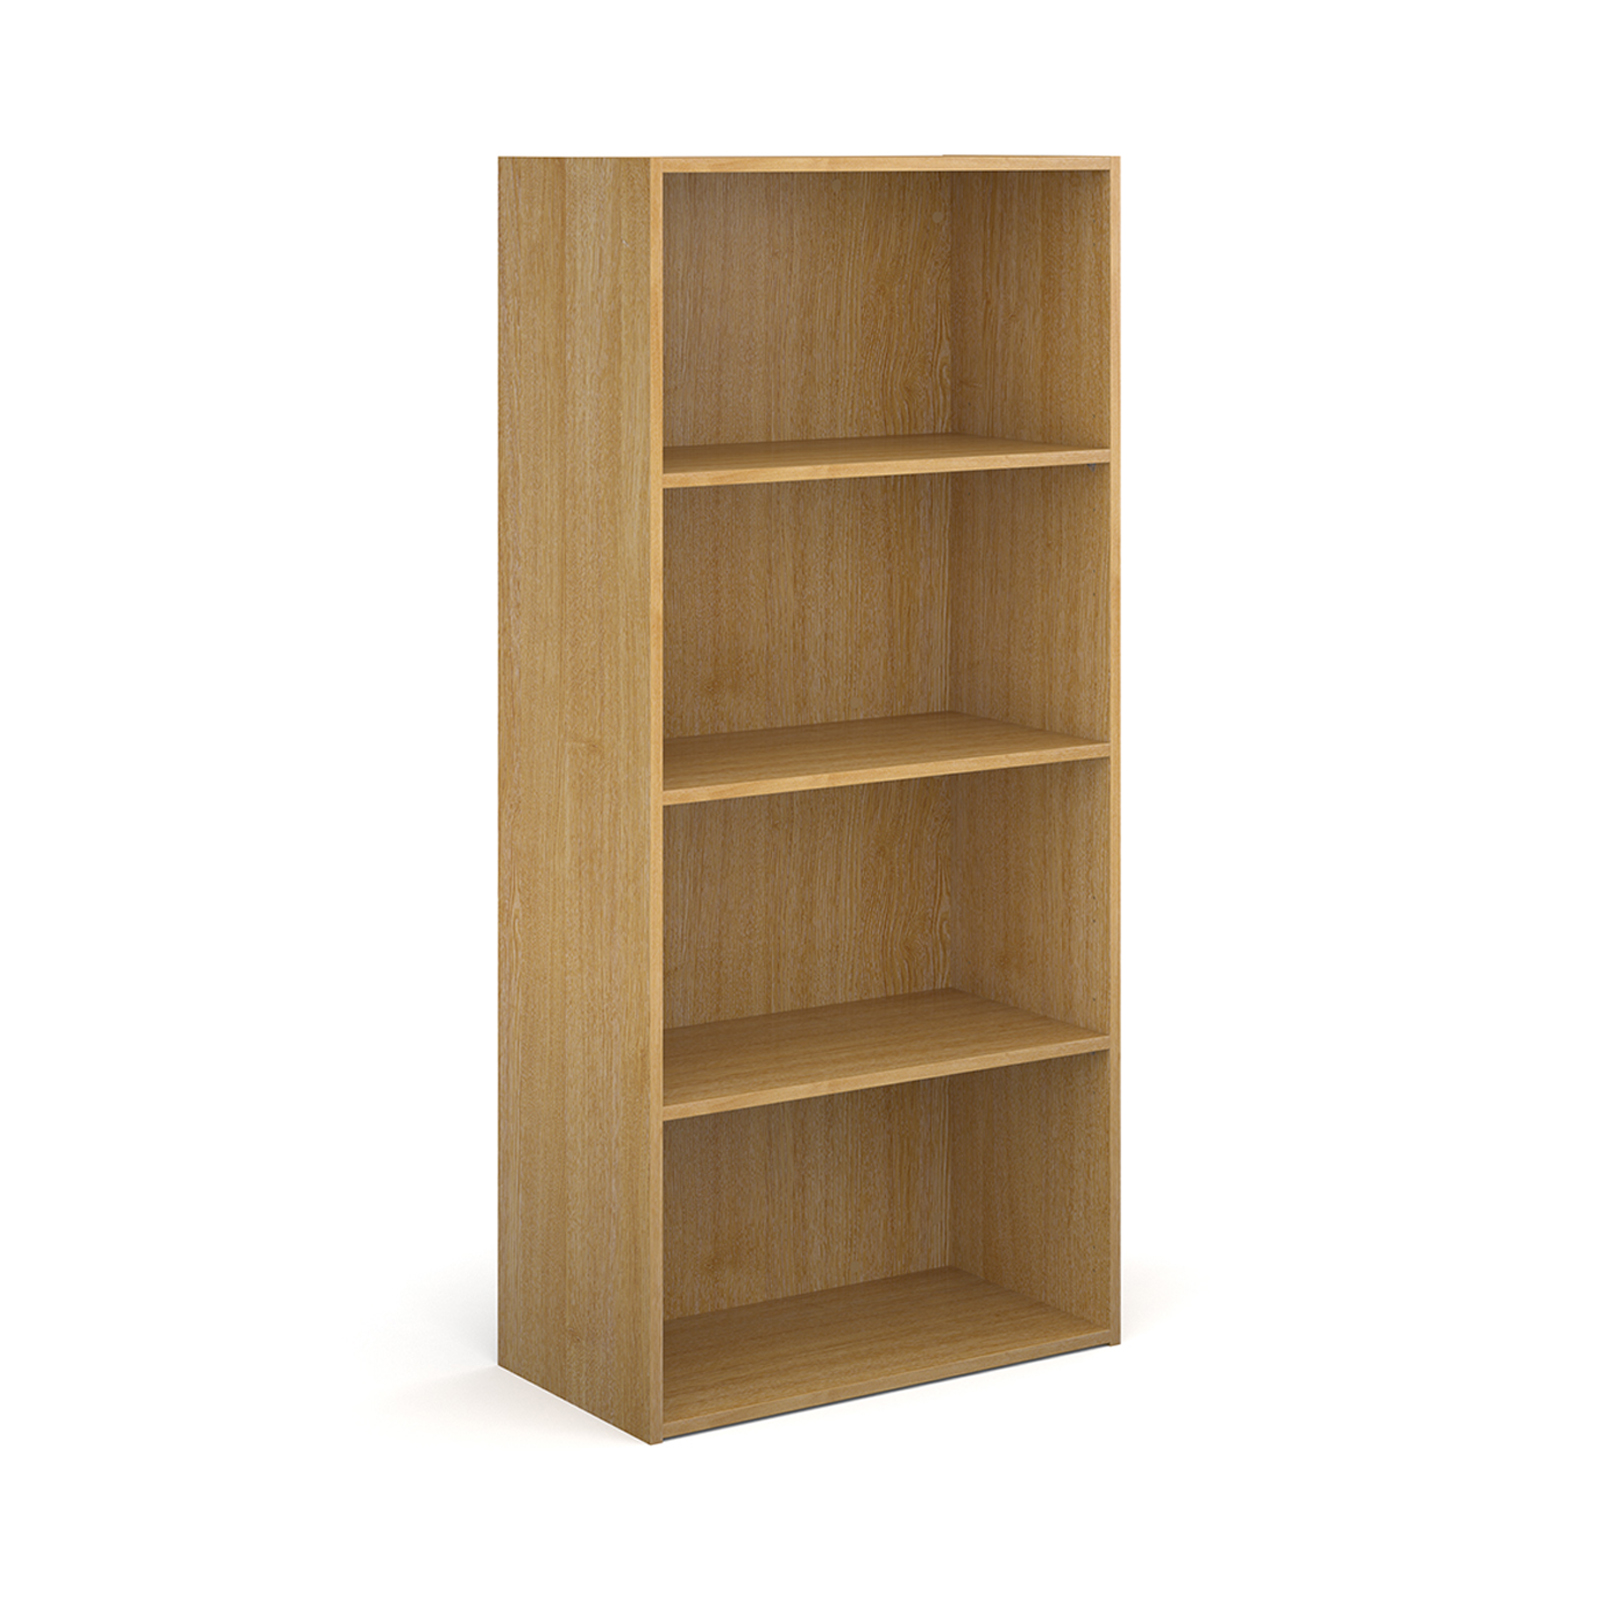 Over 1200mm High Contract bookcase 1630mm high with 3 shelves - oak